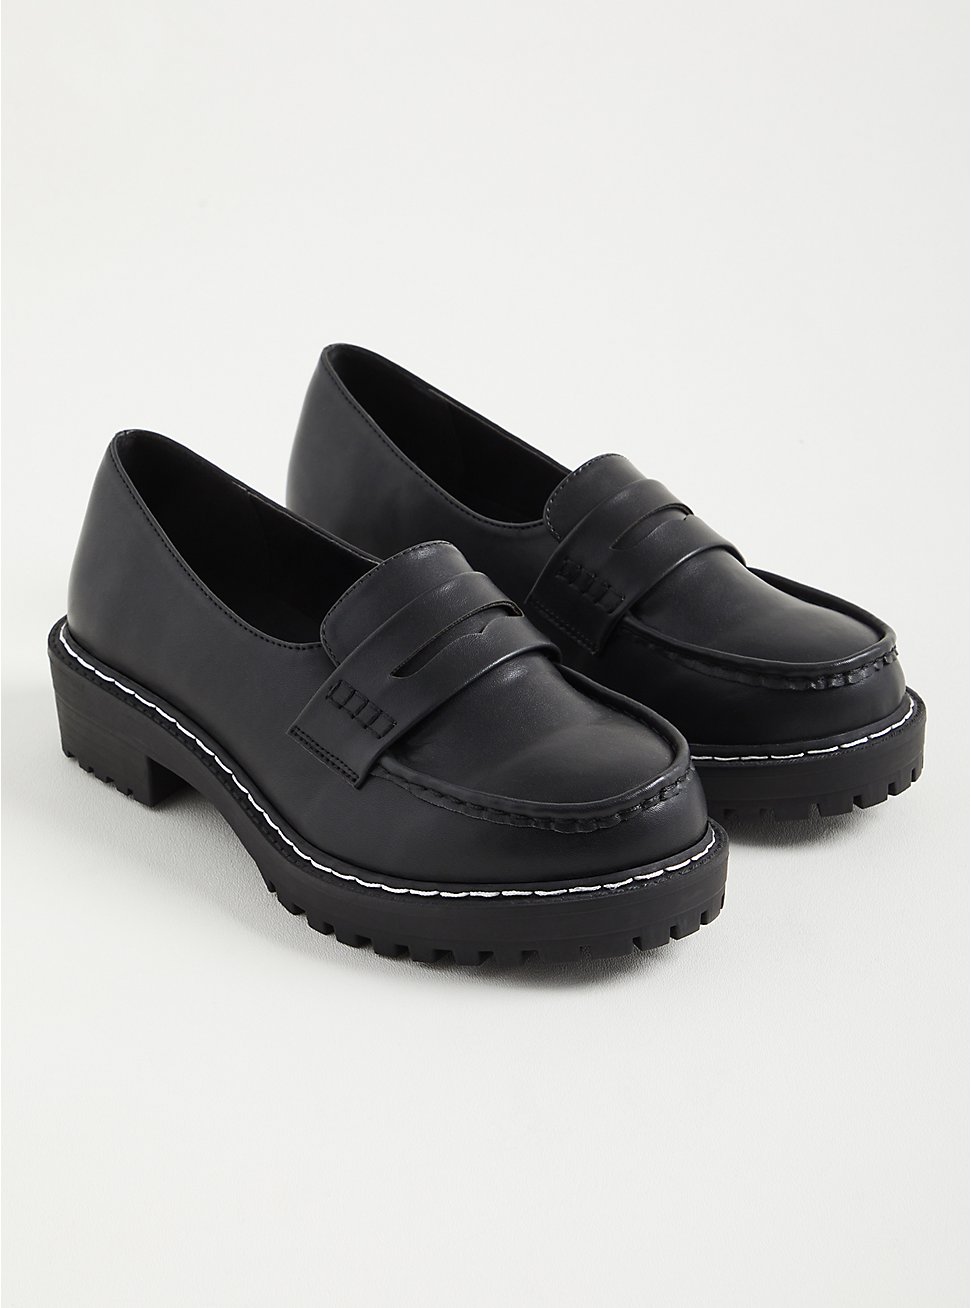 Chunky Loafer - Faux Leather Black (WW), BLACK, hi-res